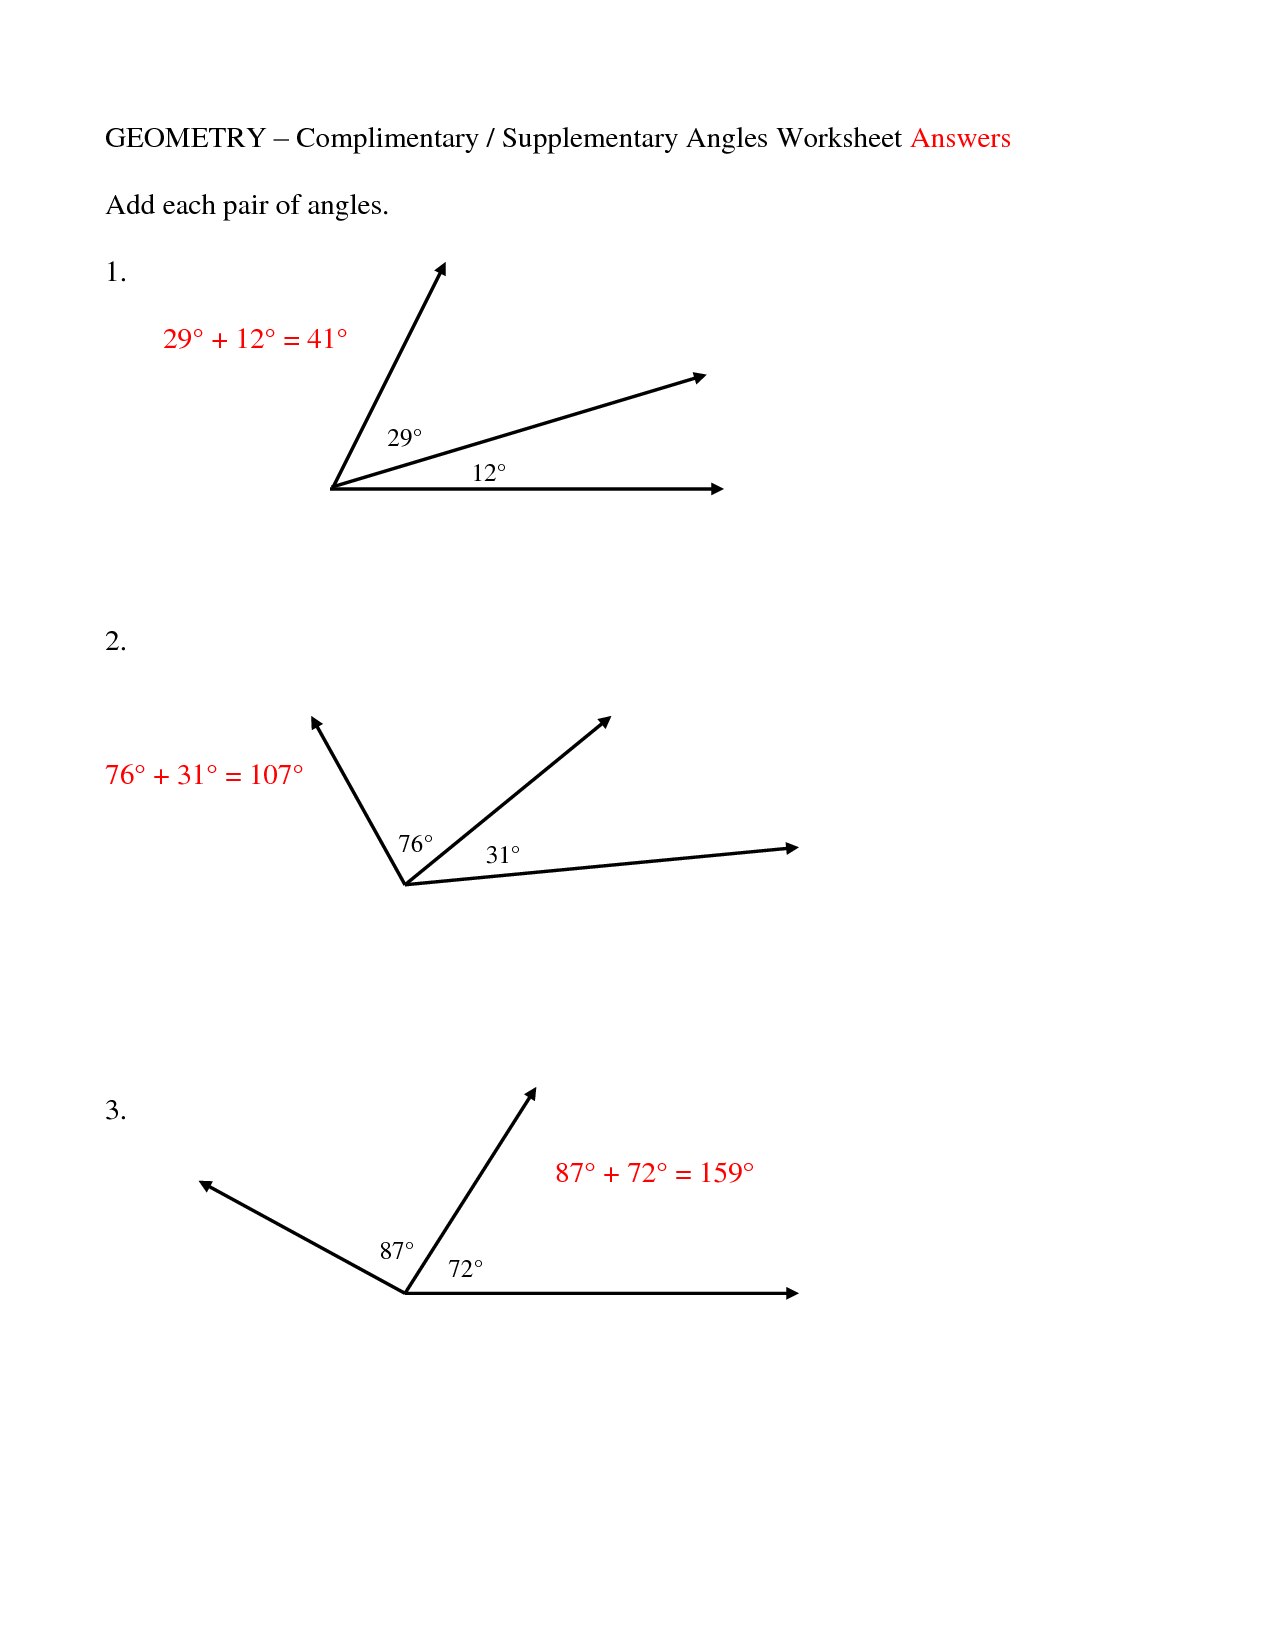 complementary and supplementary angles assignment